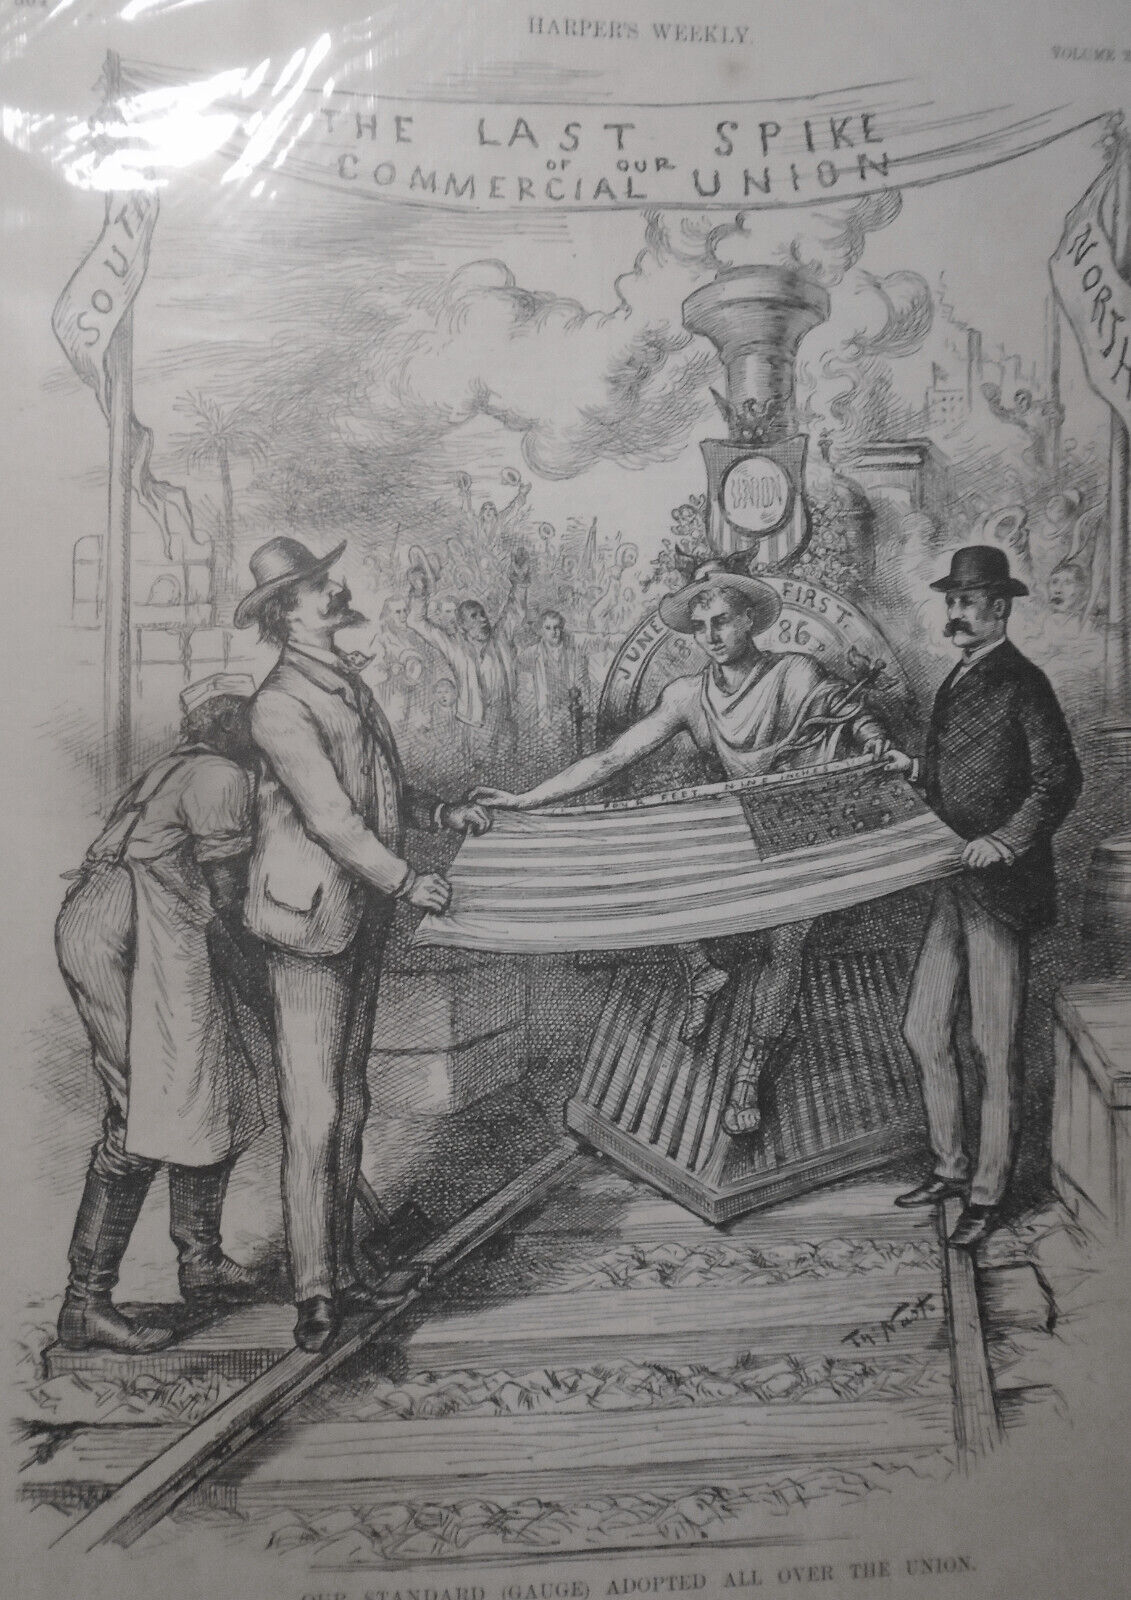 1886 Our standard (gauge) adopted all over the union by Thomas Nast